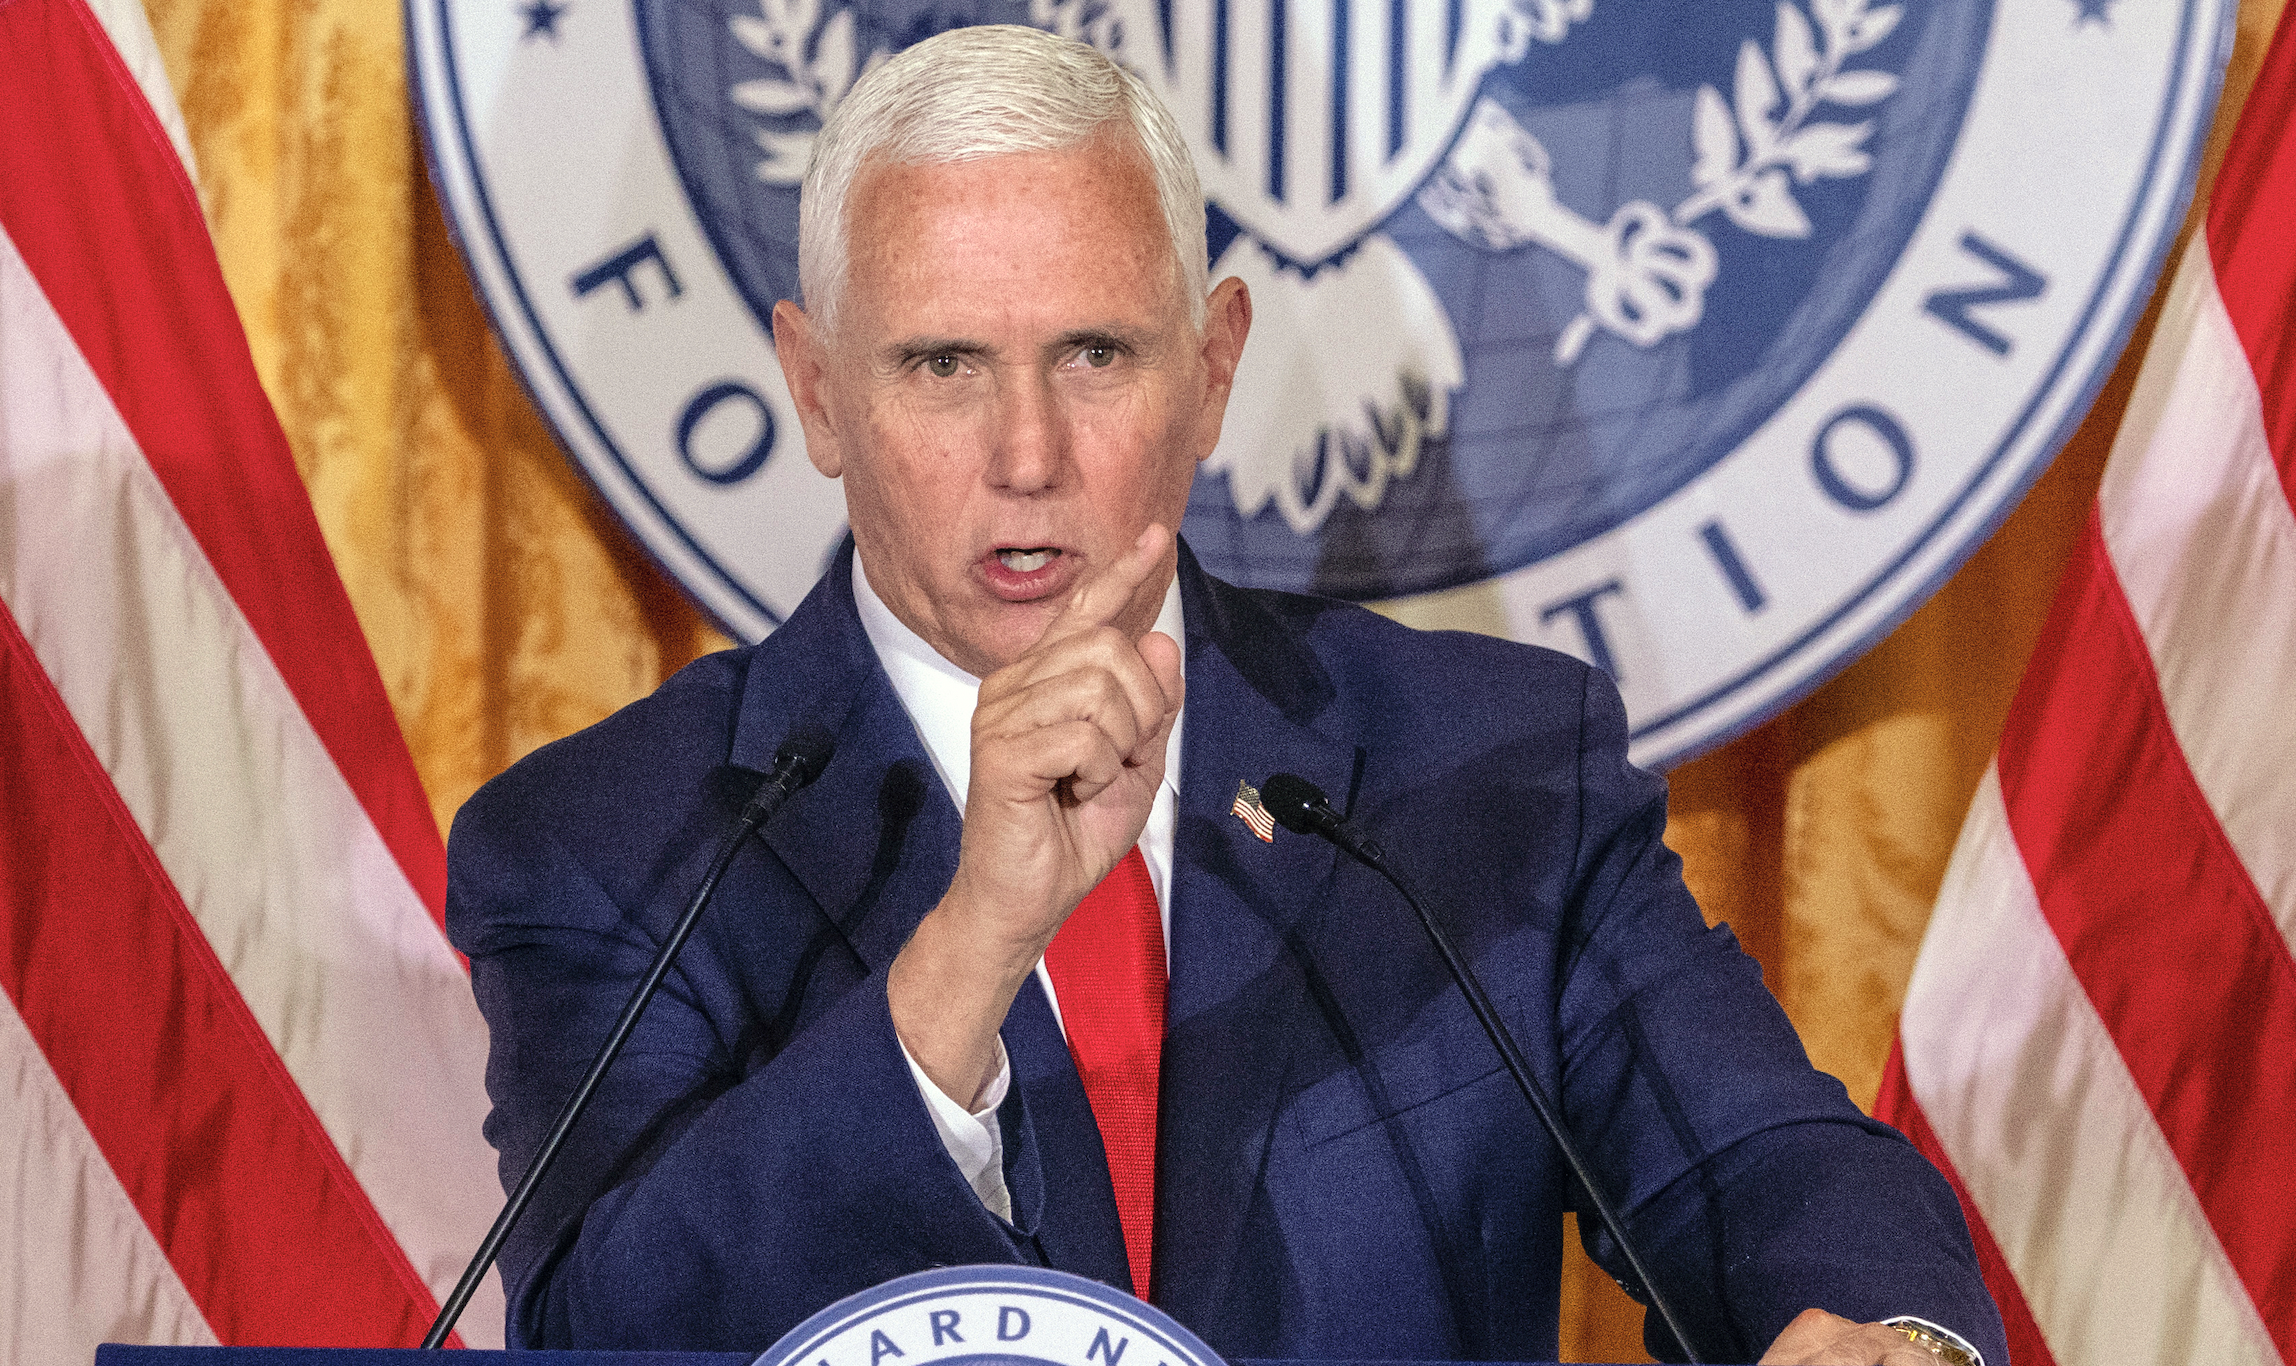 Get ready, folks! Mike Pence just revealed his timeline for announcing his presidential bid. The suspense is killing us! Here’s what we know so far…